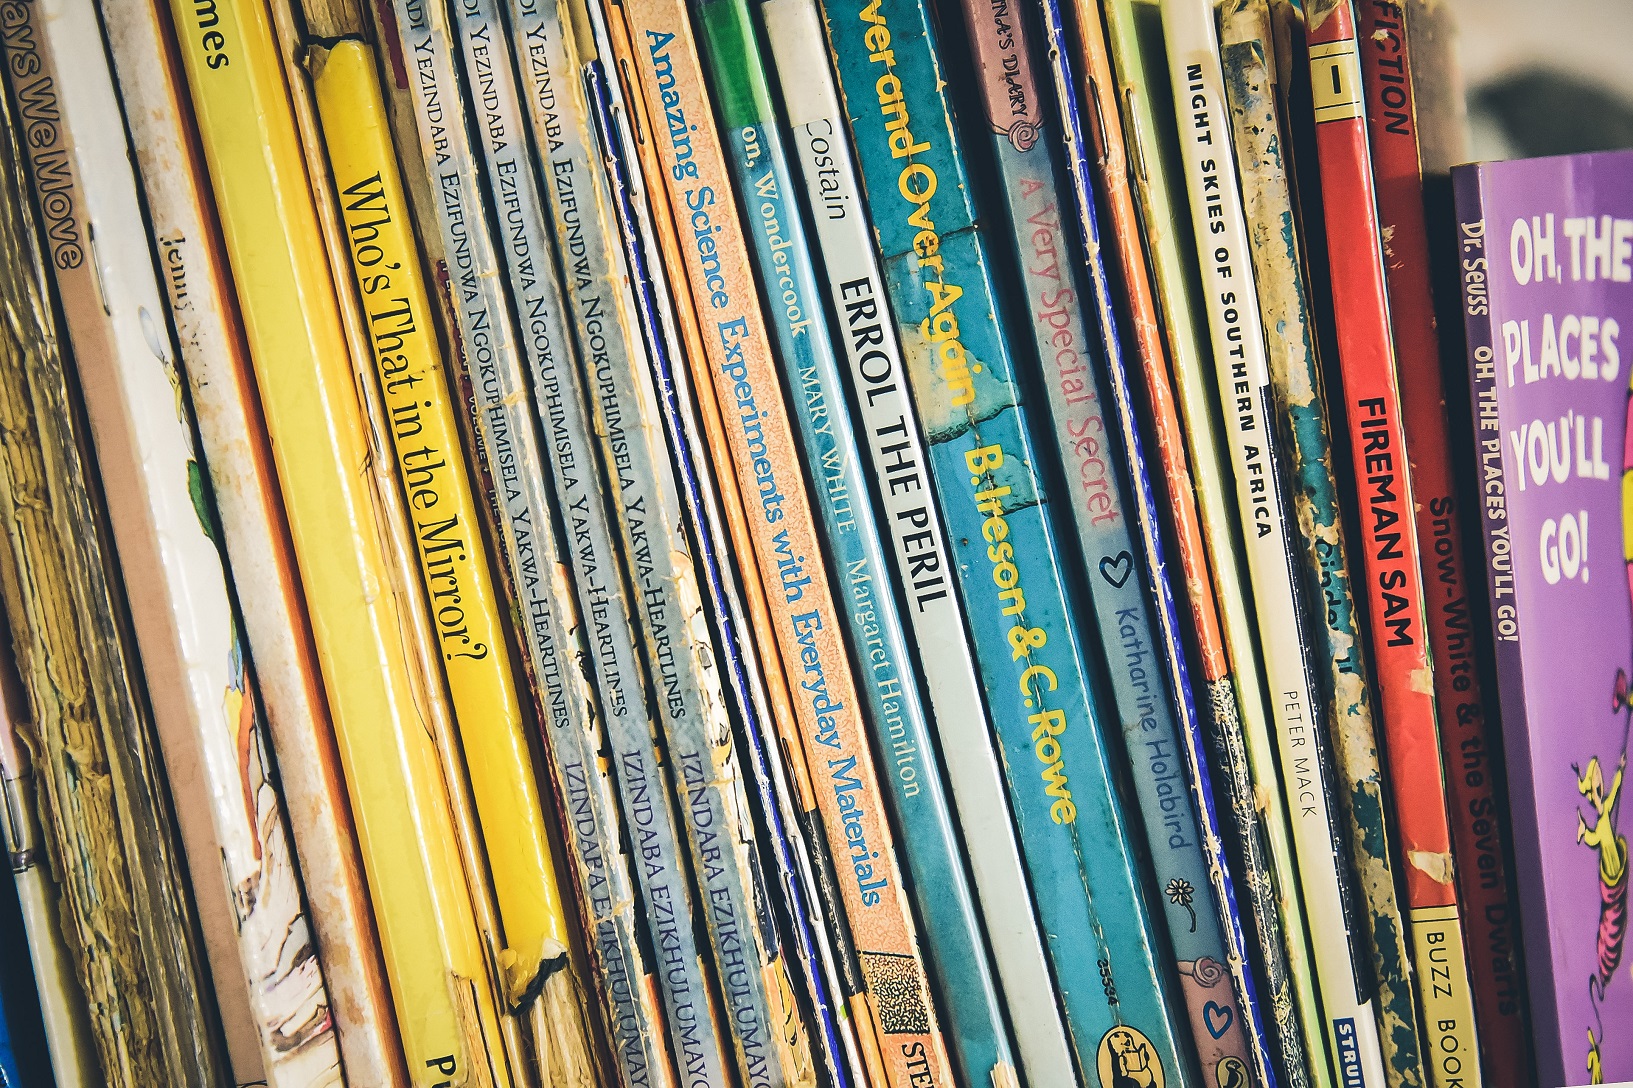 A colorful collection of children's books